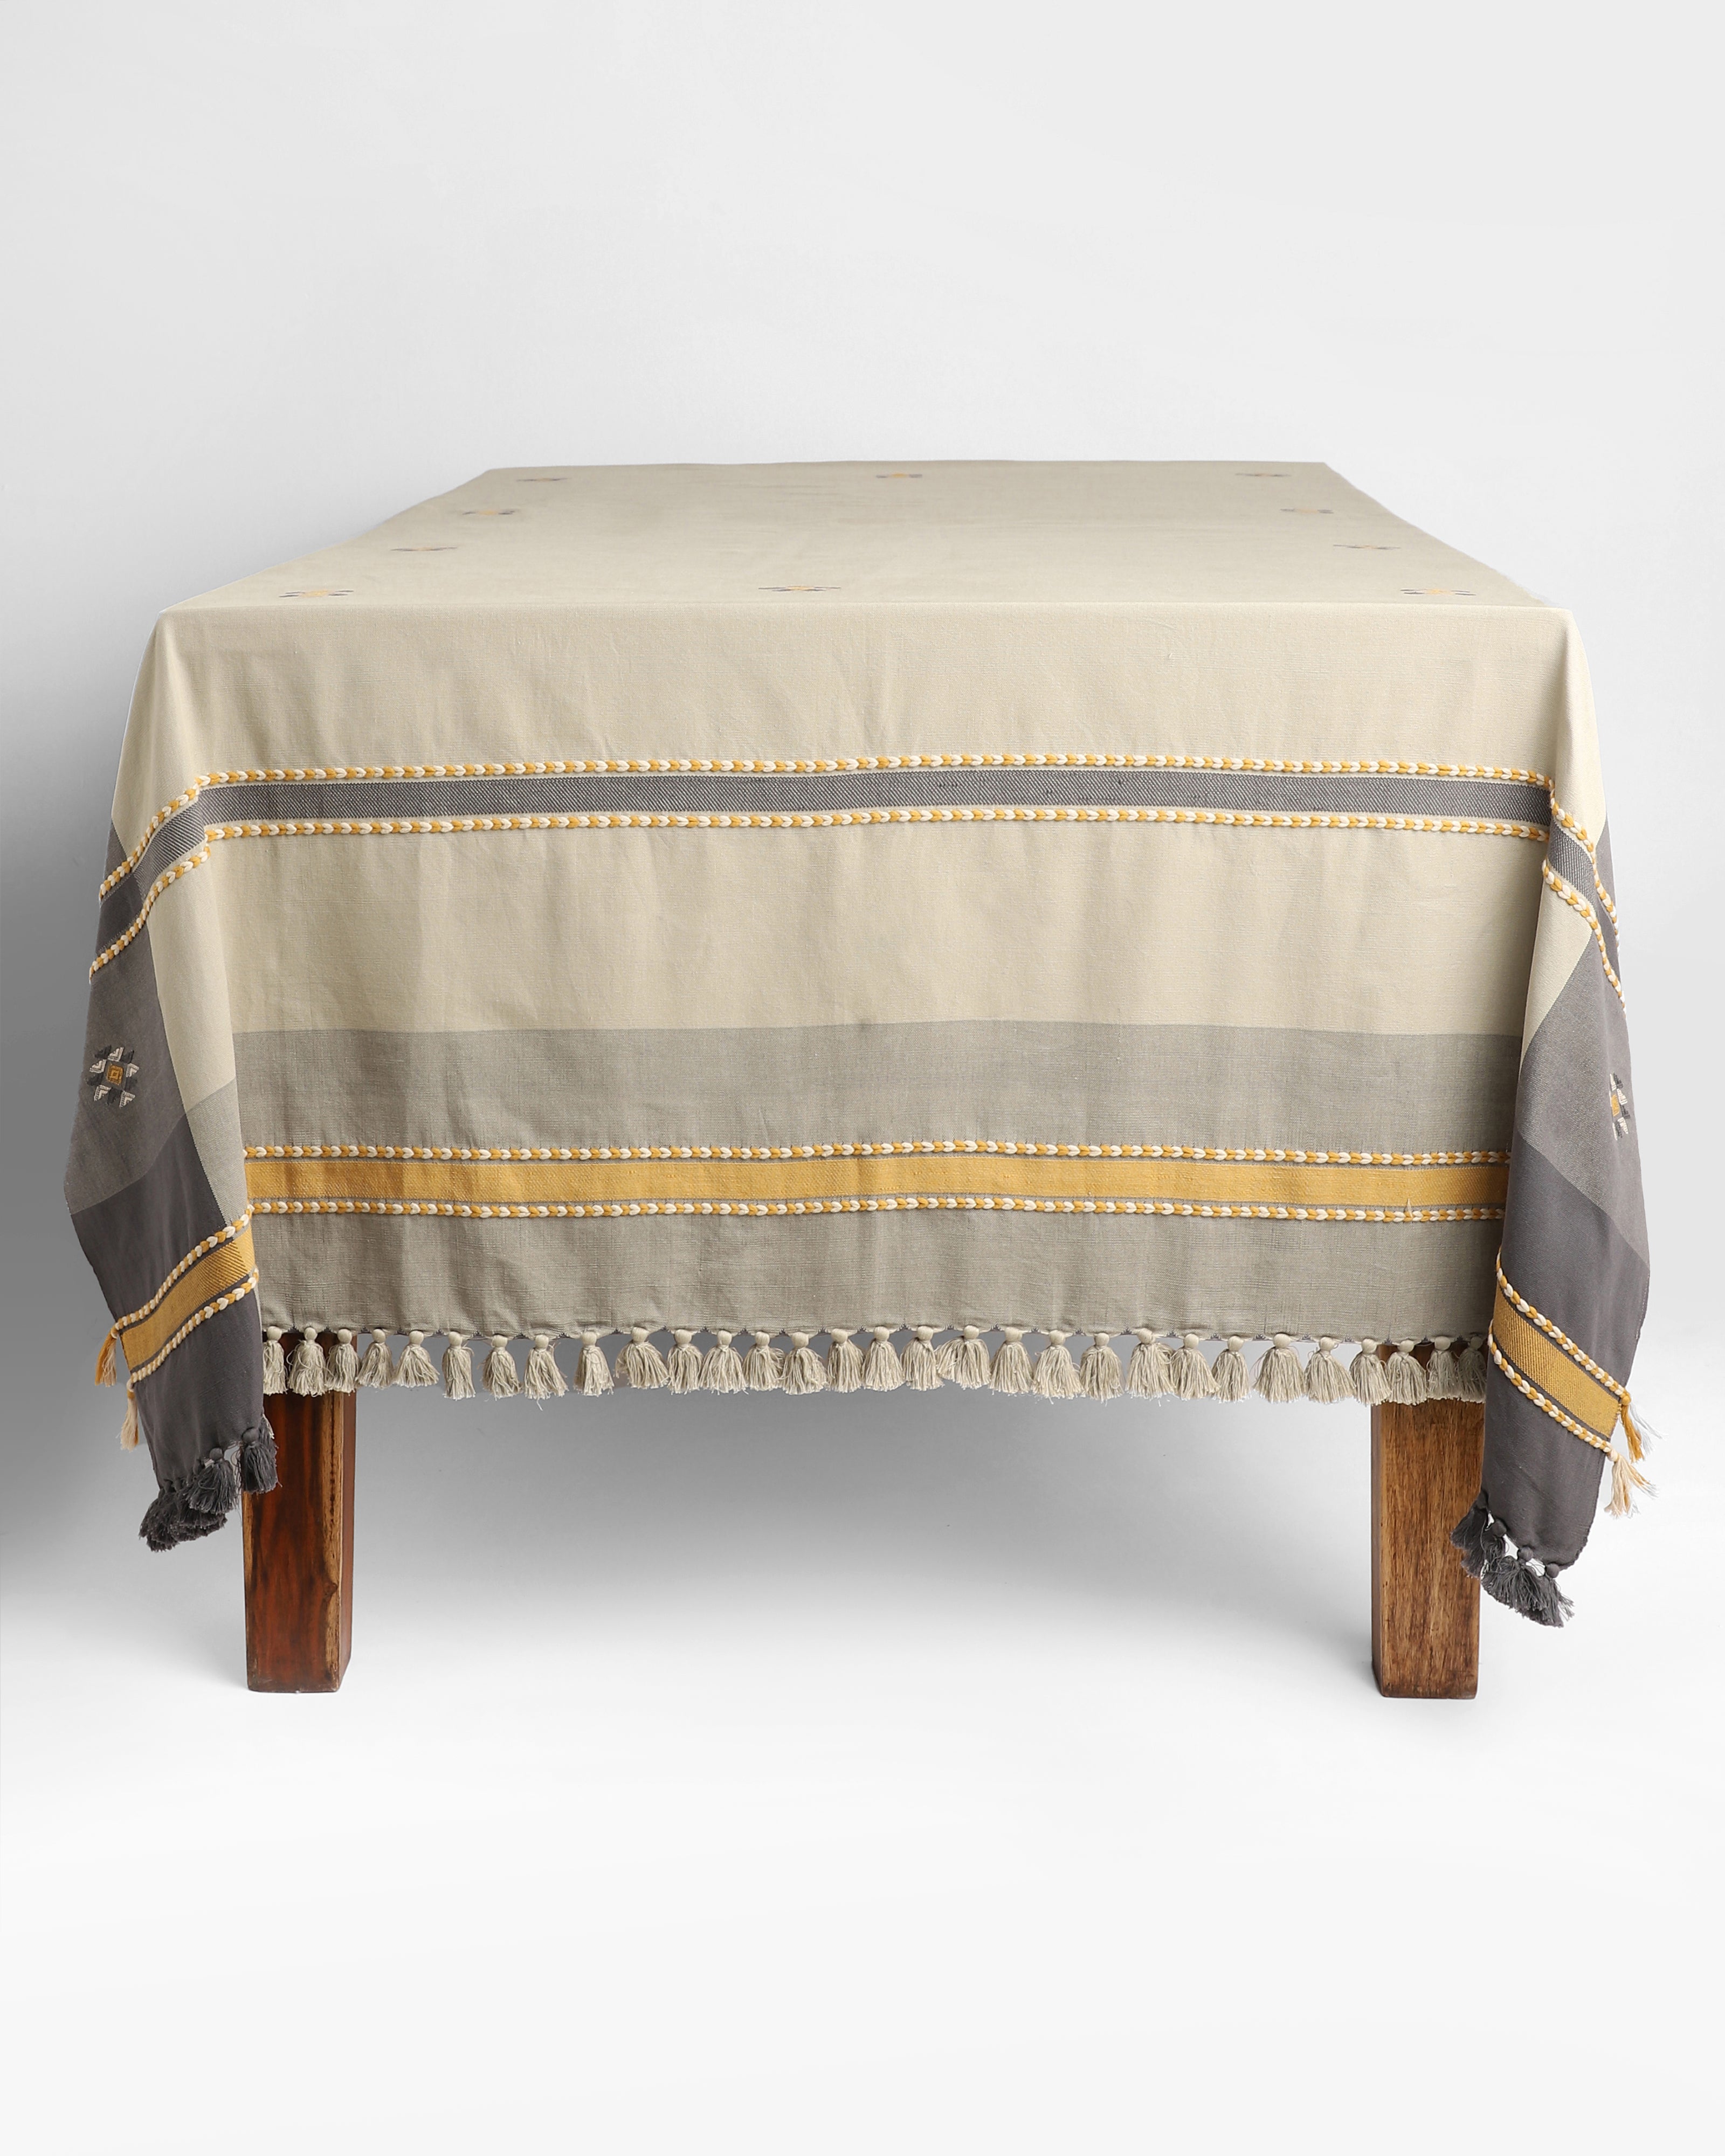 Reyhaan Extra Weft Cotton Table Cover